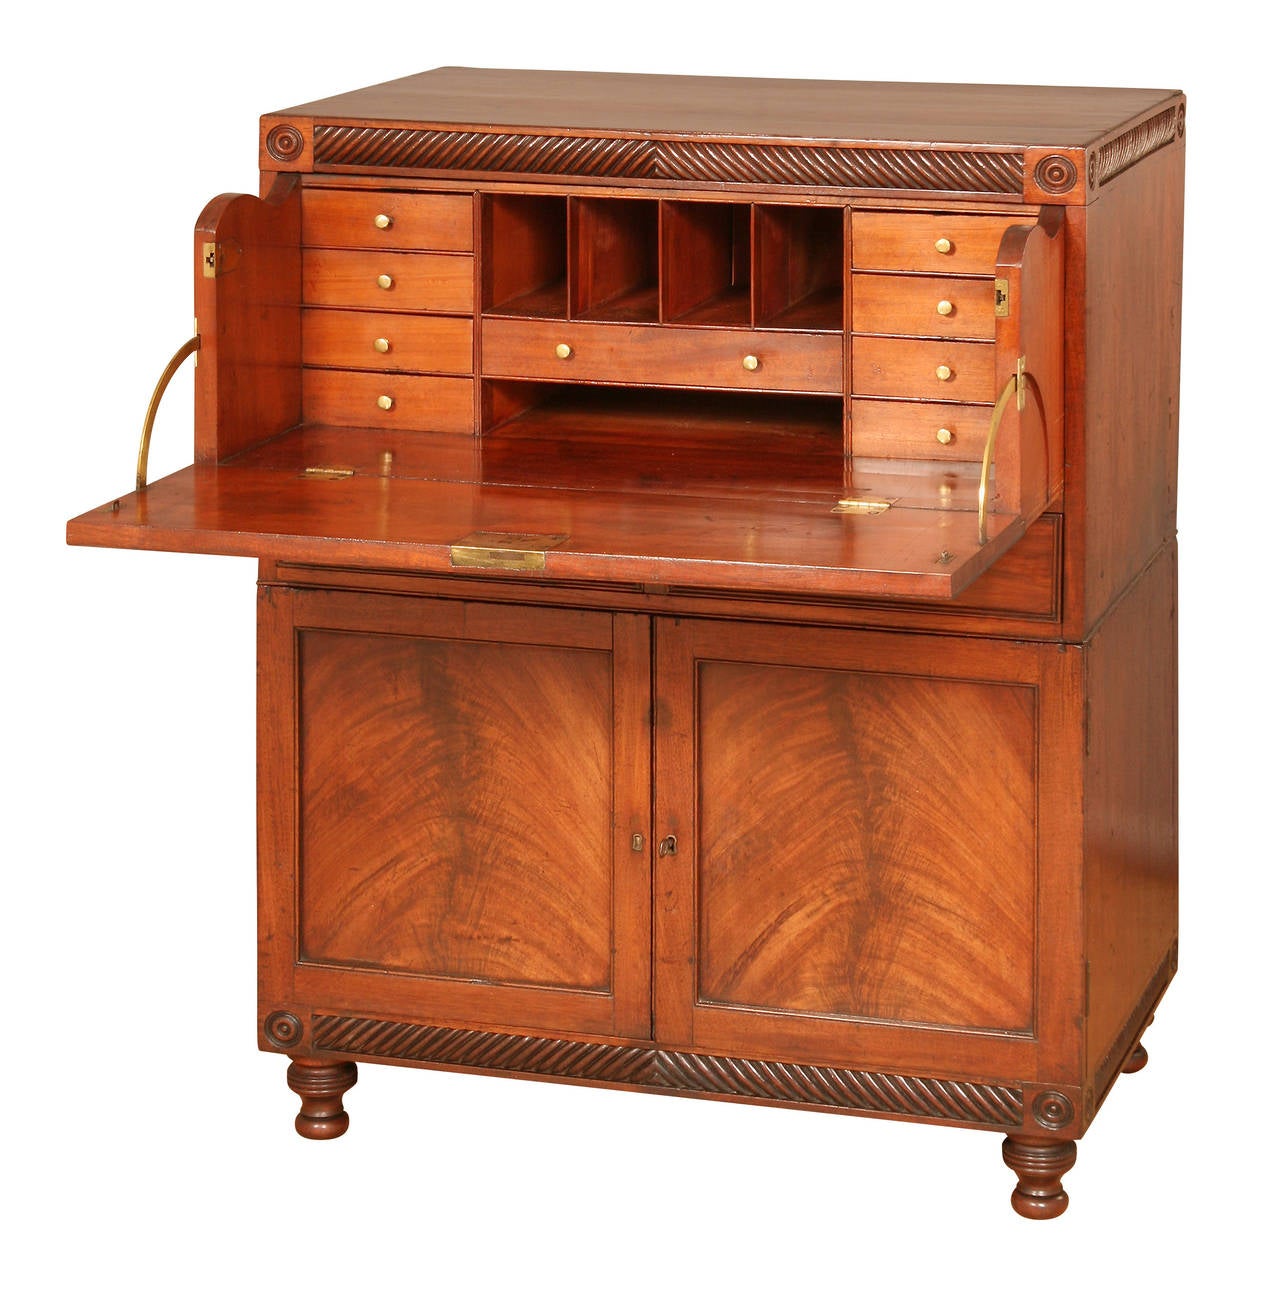 This Georgian mahogany Campaign Chest is earlier than most on the market. Although the chest has turned roundels to the corners and a wide decorative moulding to the top and bottom it has no overhanging timber that might suffer during travel. The